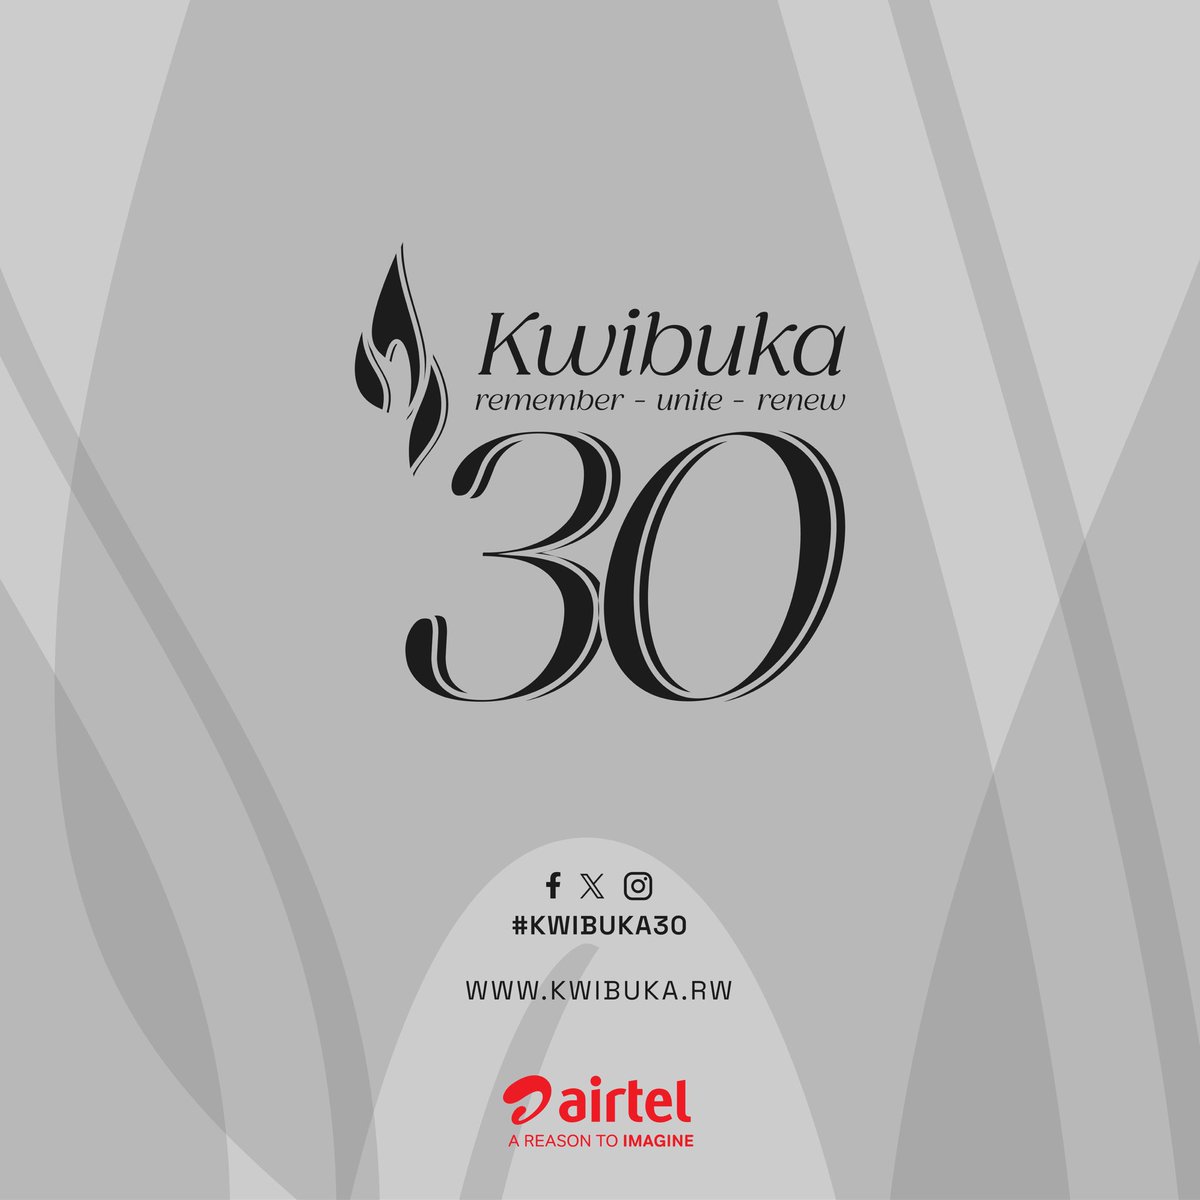 As we enter the commemoration week, Airtel Rwanda stands with the people of Rwanda. We remember those lost in the 1994 Genocide Against the Tutsi and honor their memory. Our hearts are with the survivors. #Kwibuka30